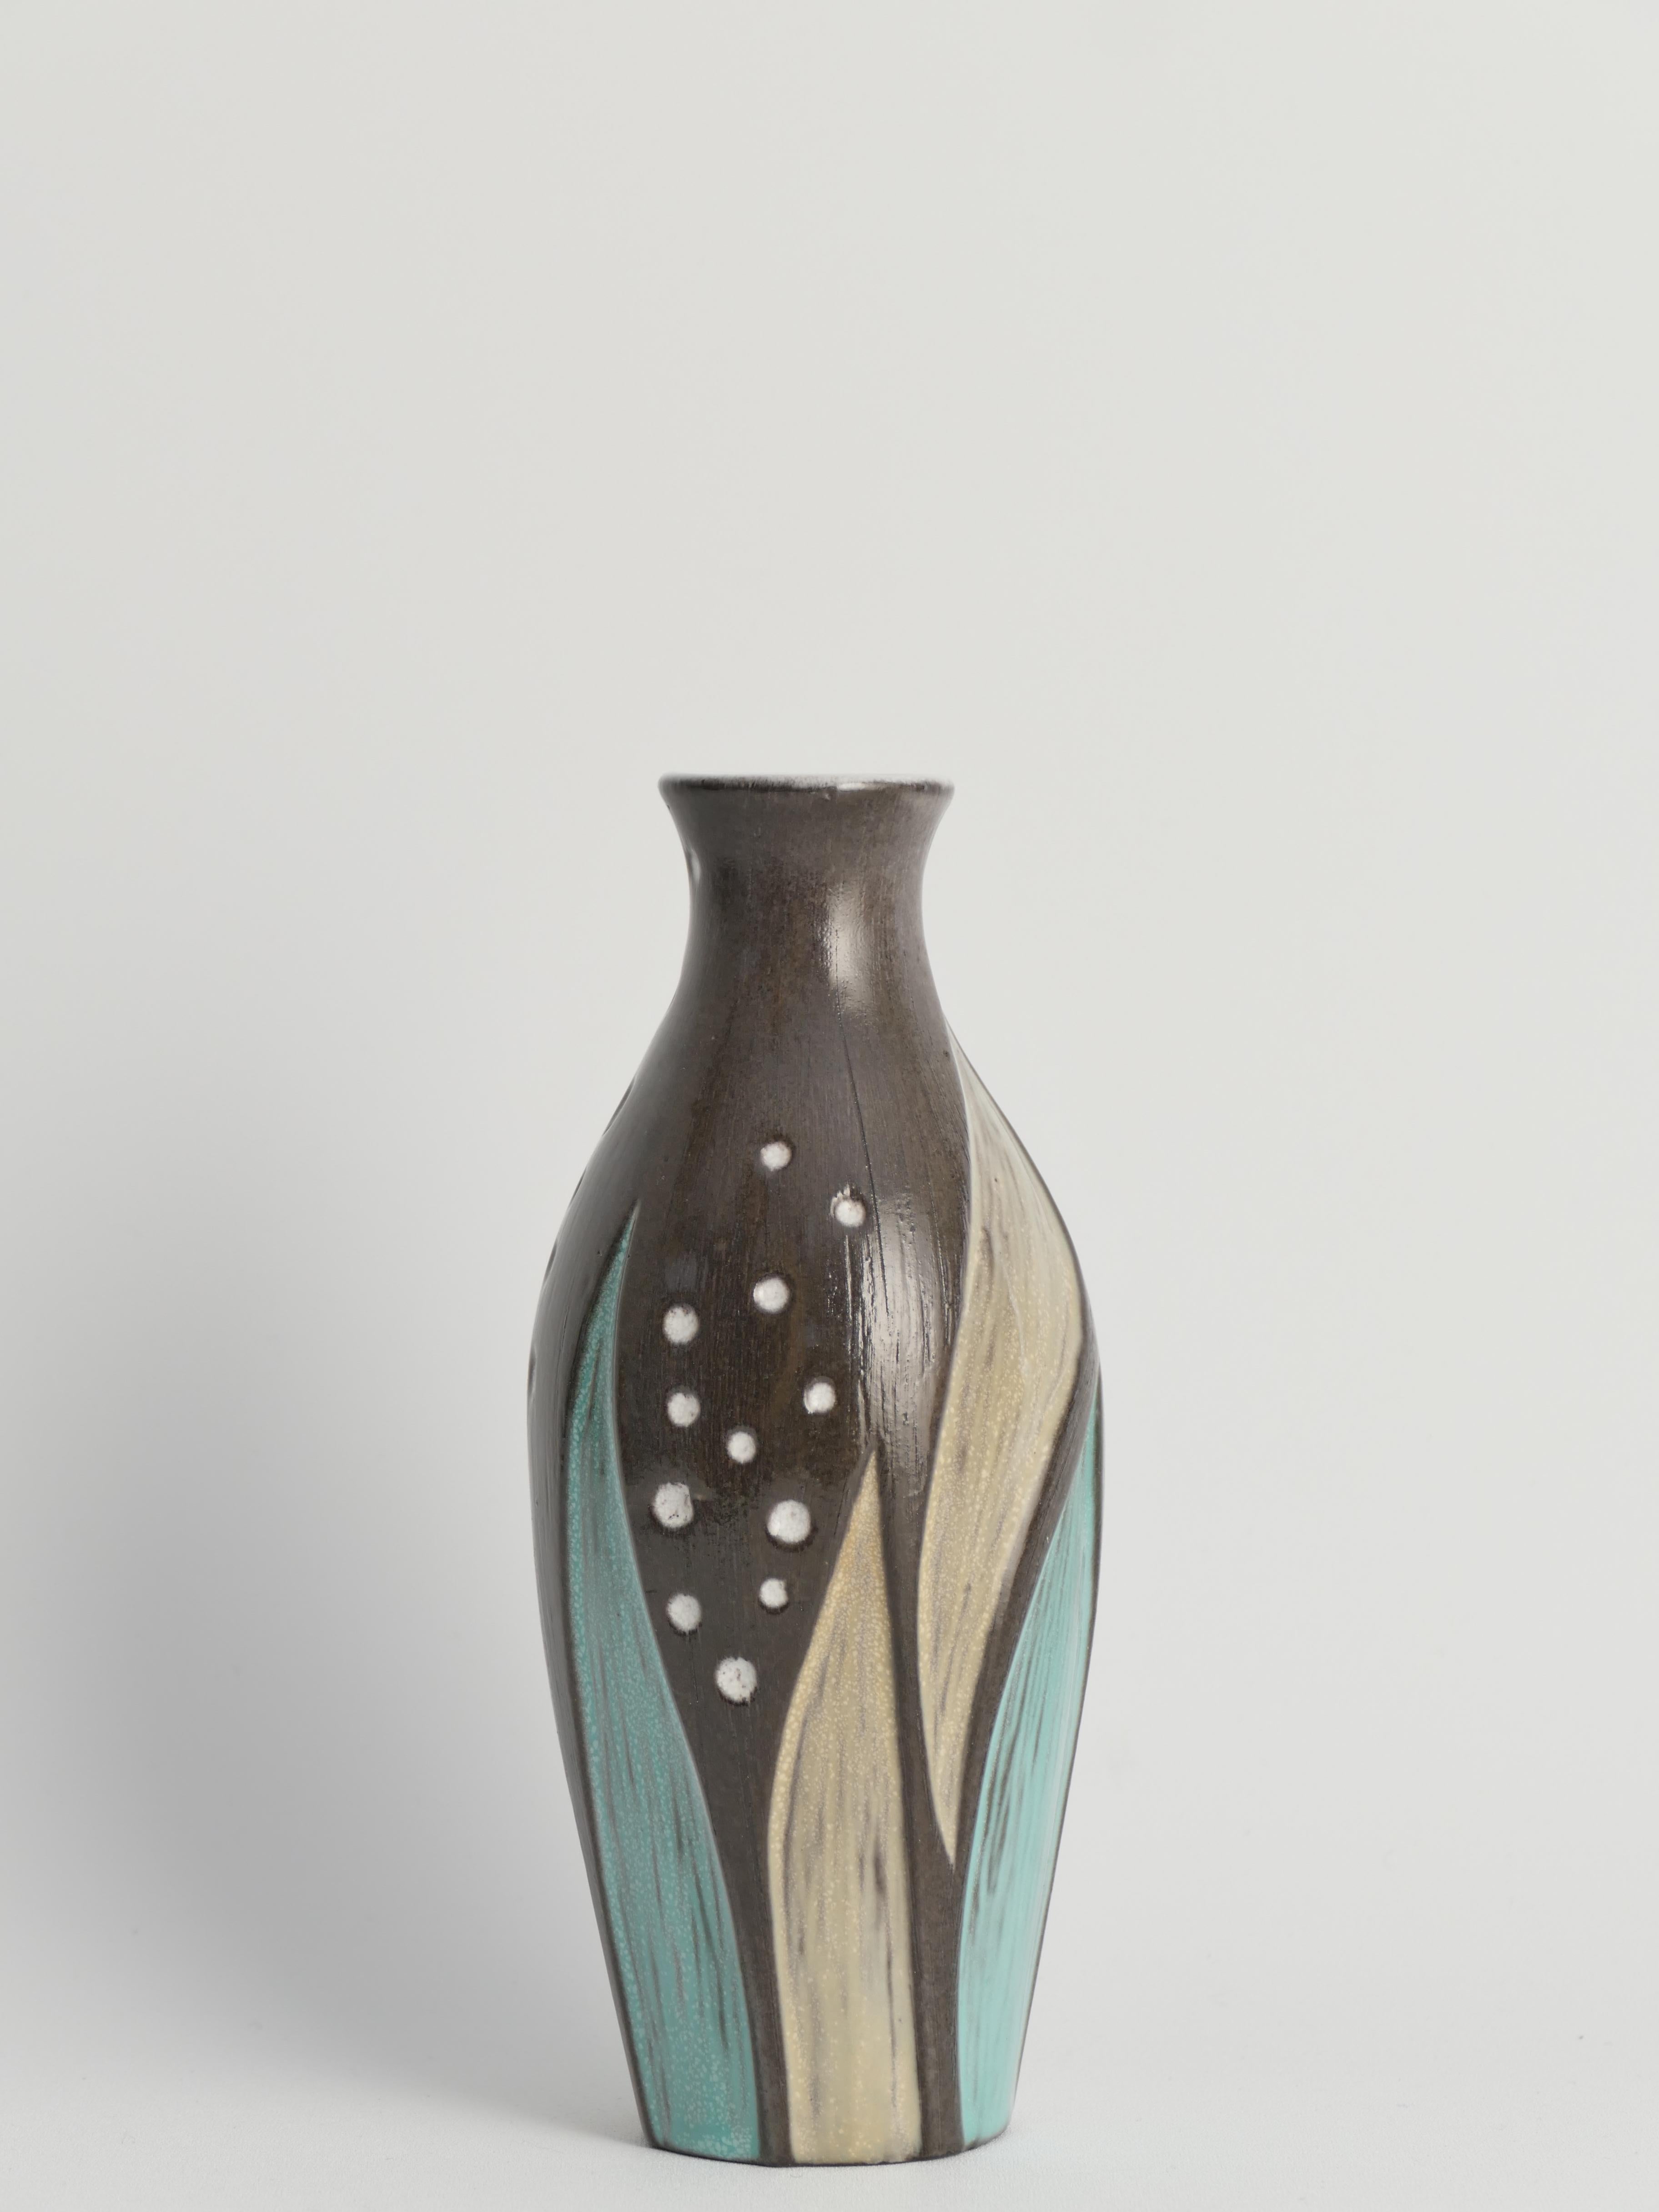 Mid-20th Century Ceramic Vase with Seaweed Motif by Mari Simmulson for Upsala Ekeby, Sweden 1950s For Sale